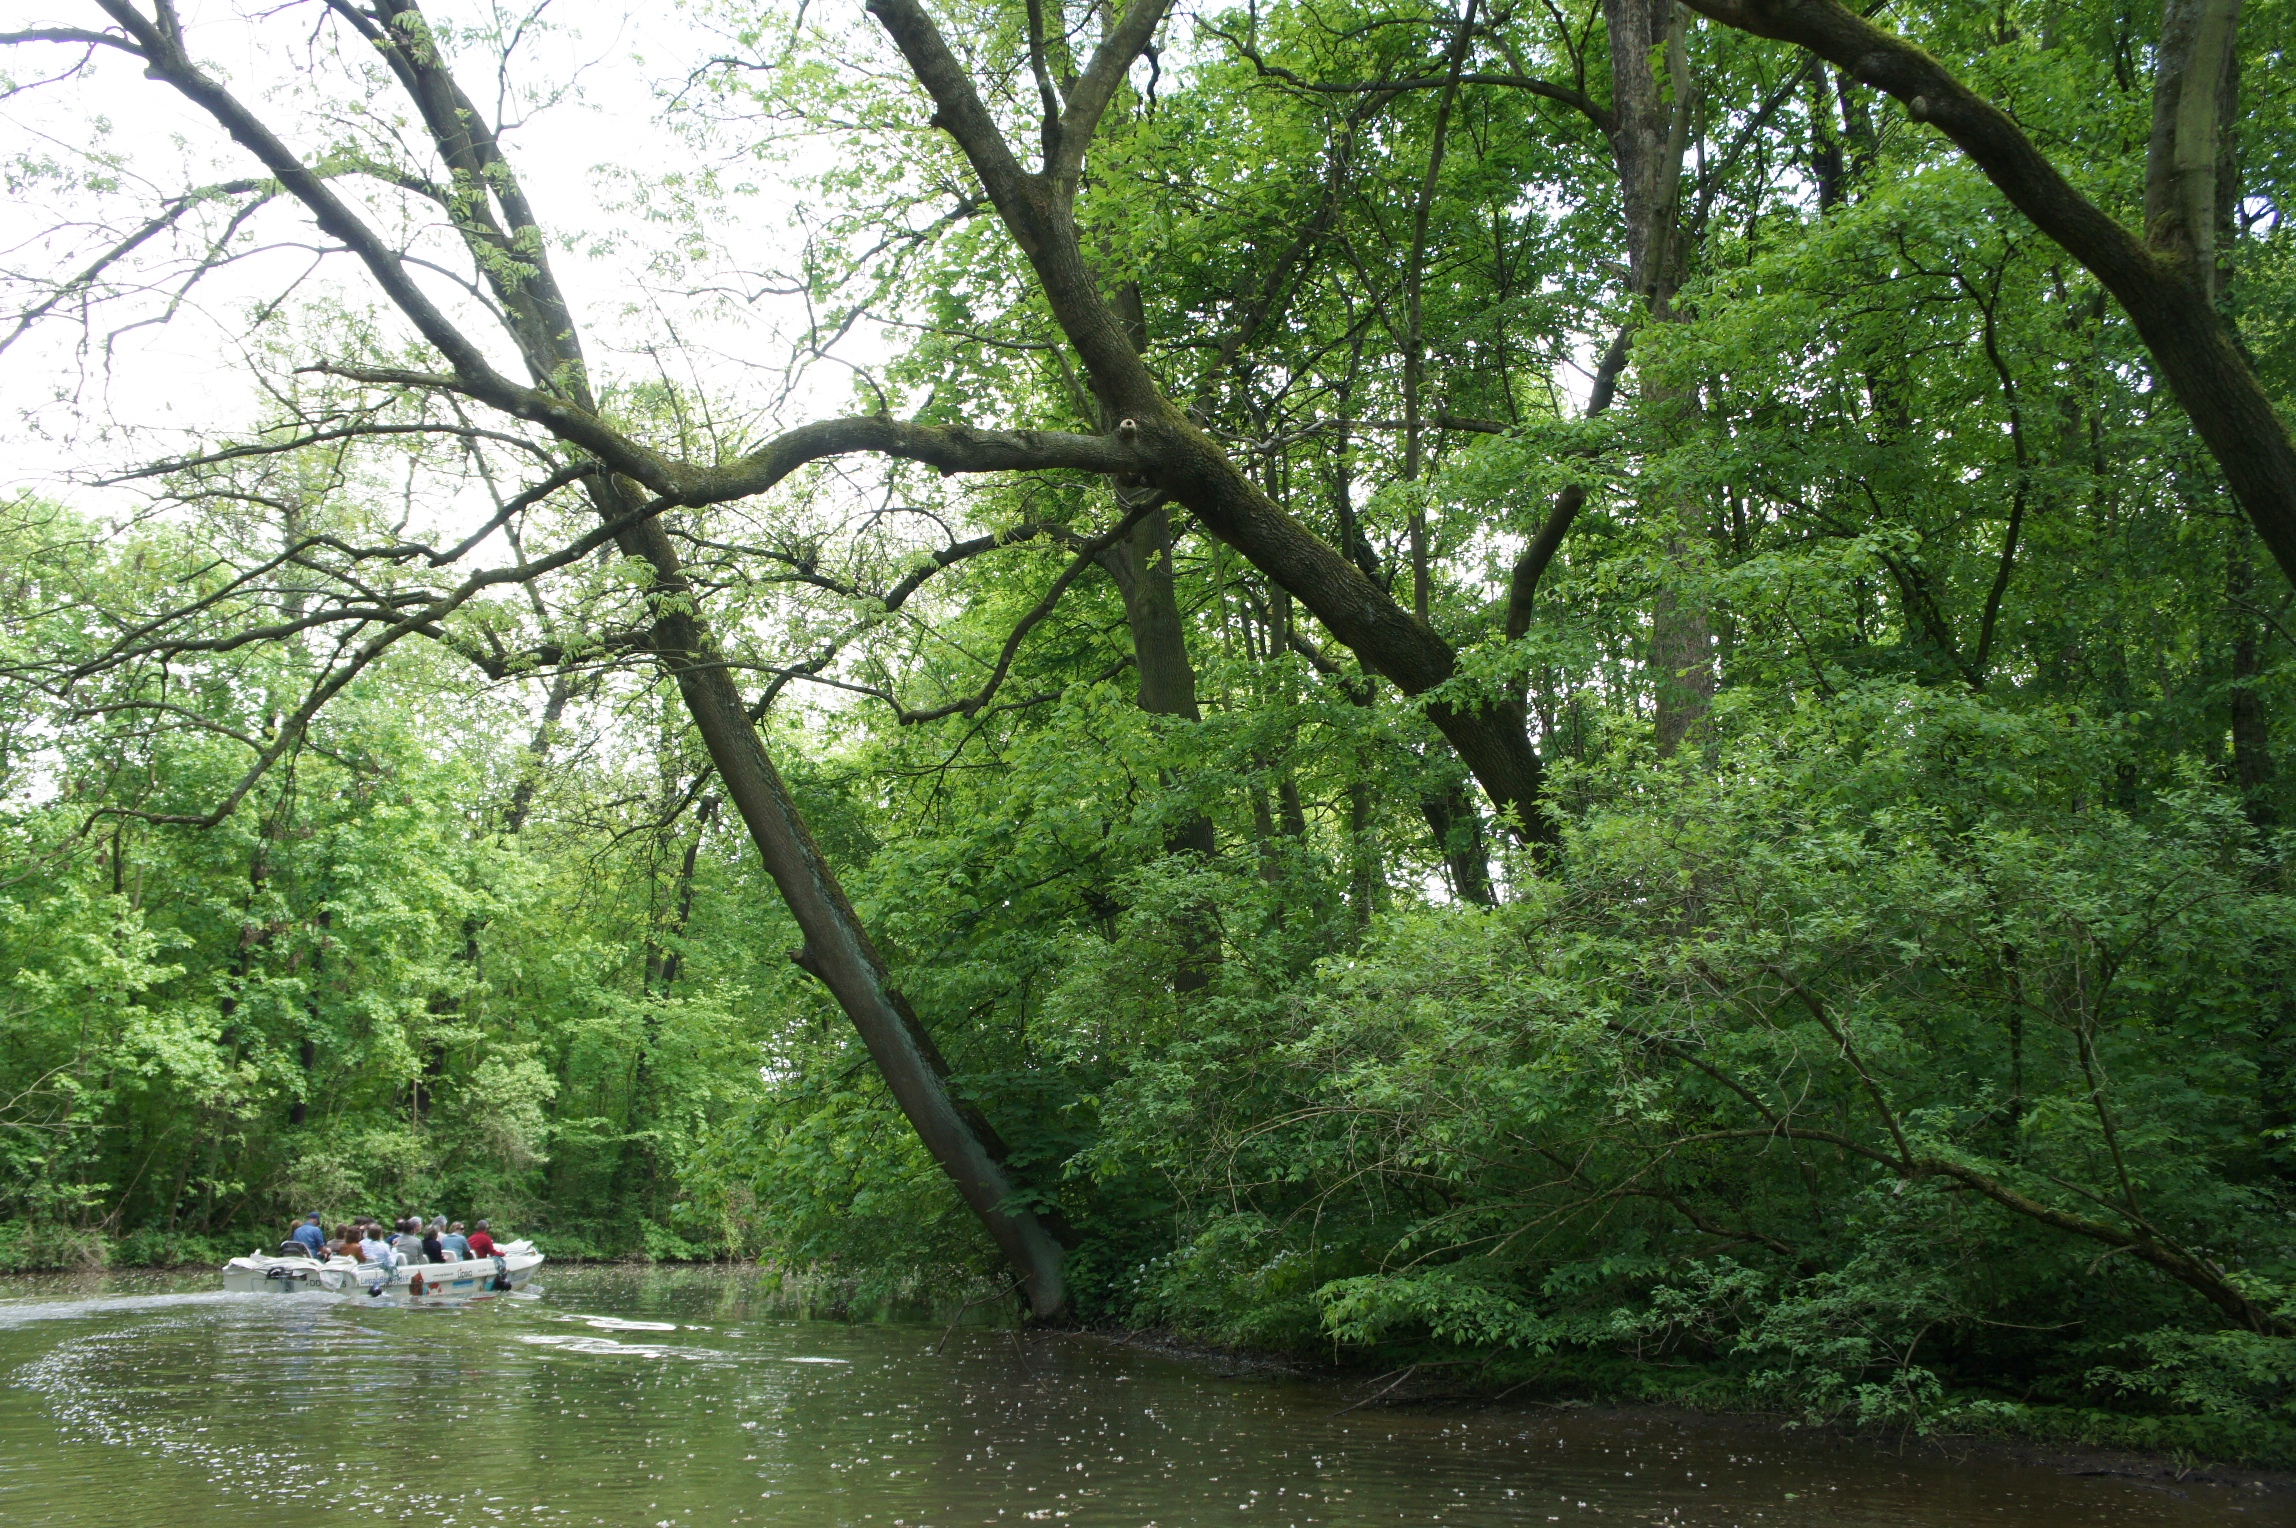 Experiencing the floodplain forests of the city of Leipzig, Germany, from the river (photo by Matilda Annerstedt)